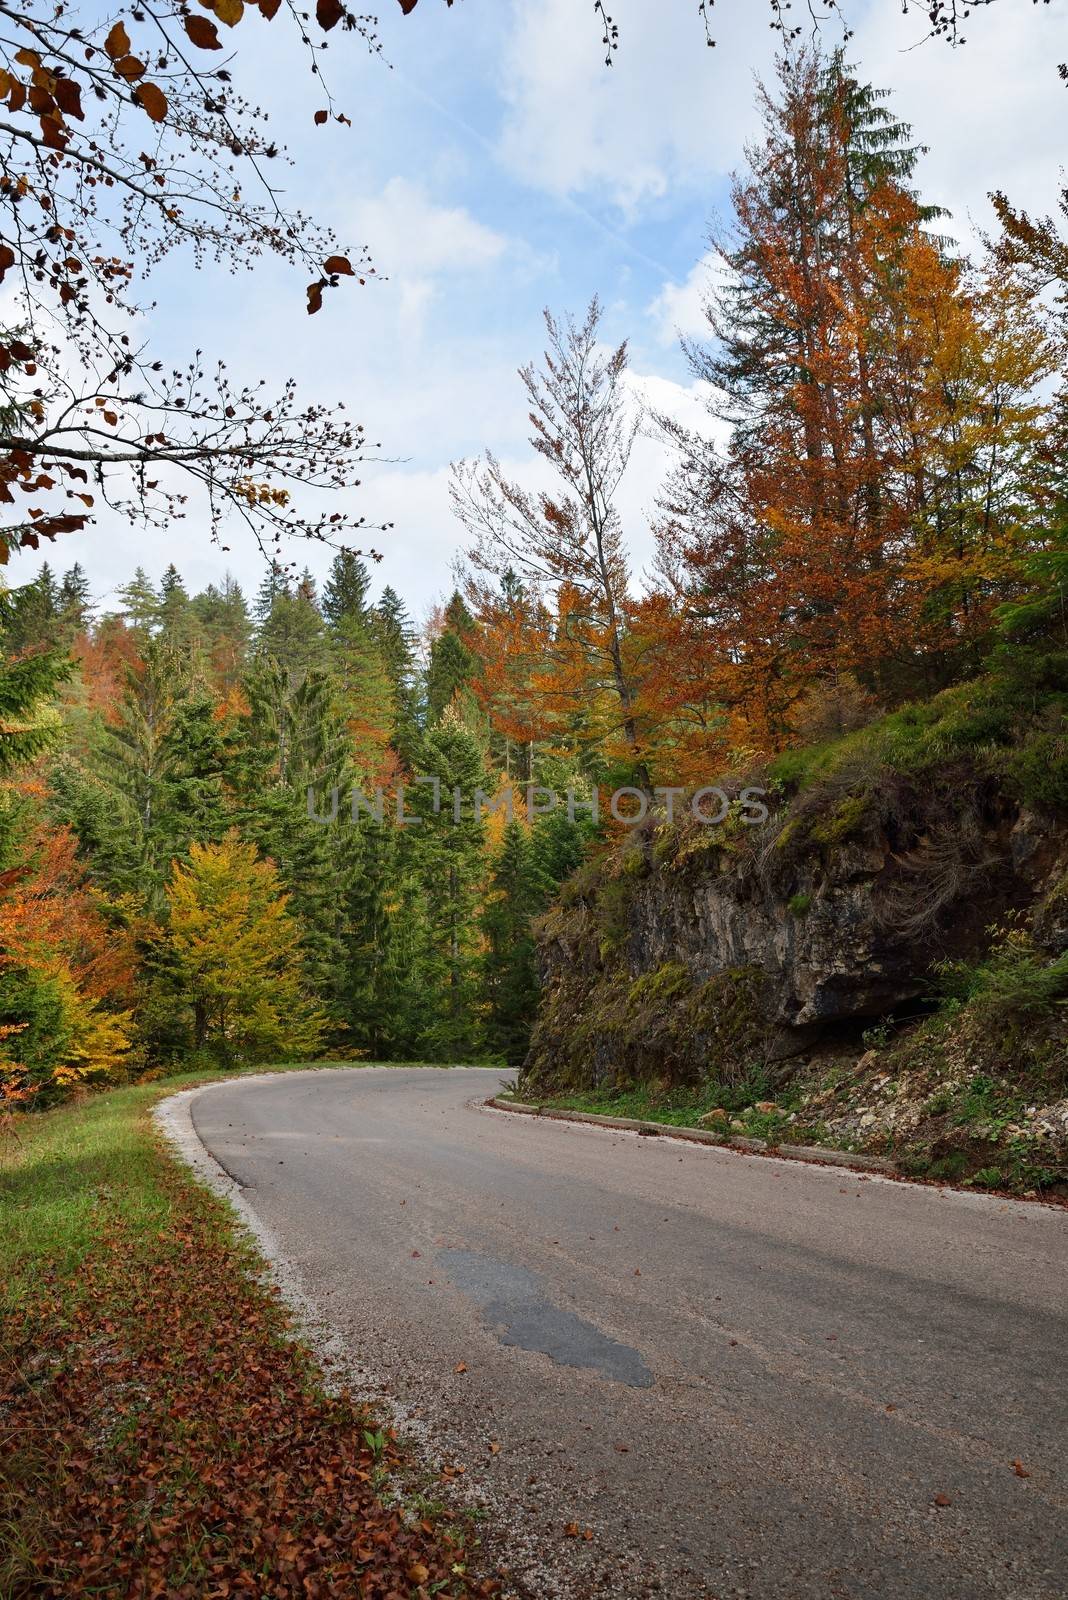 Autumn Forest with Colorful Leaves on Trees and Curved Road